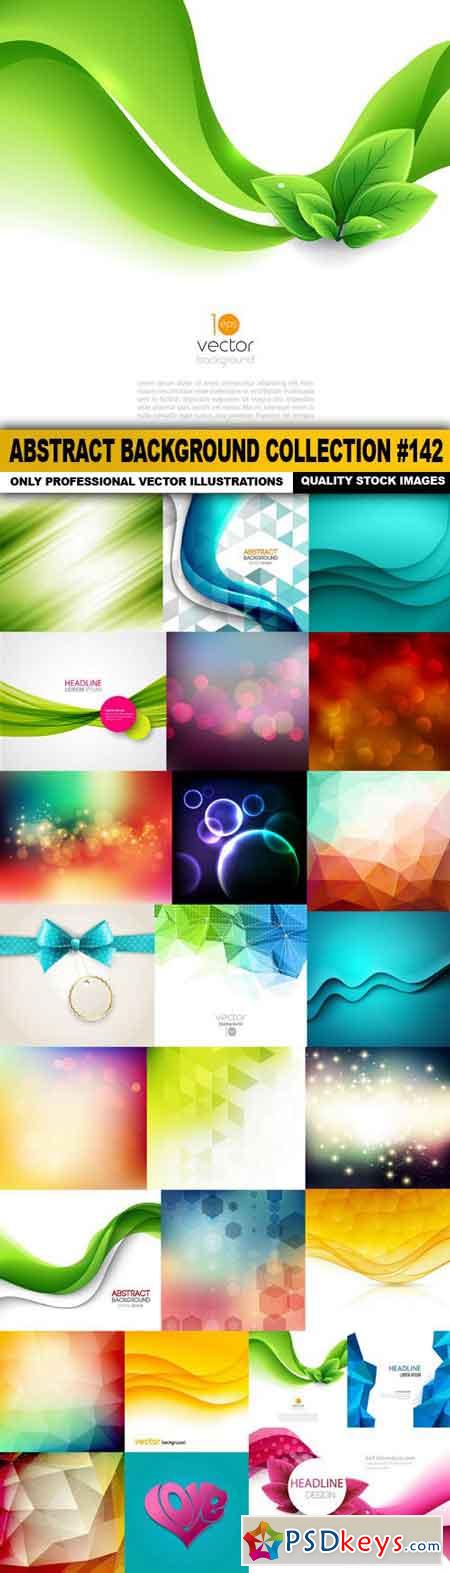 Abstract Background Collection #142 - 25 Vector